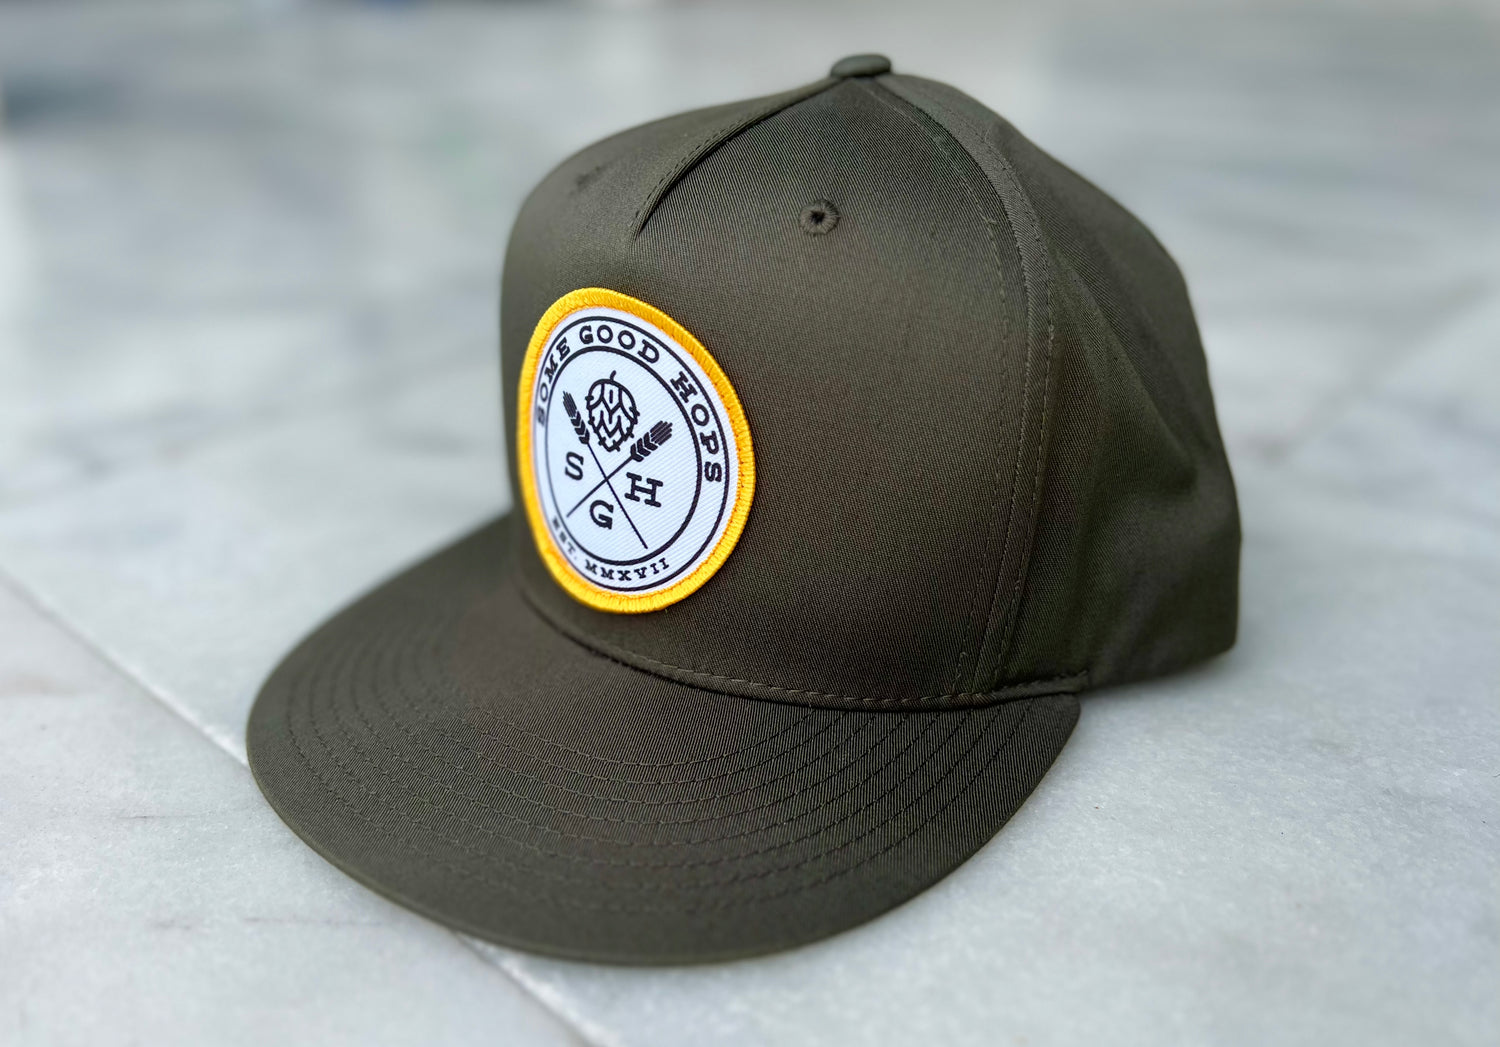 Some Good Hops Olive Green SnapBack Hat with Yellow Stitching and Black Logo